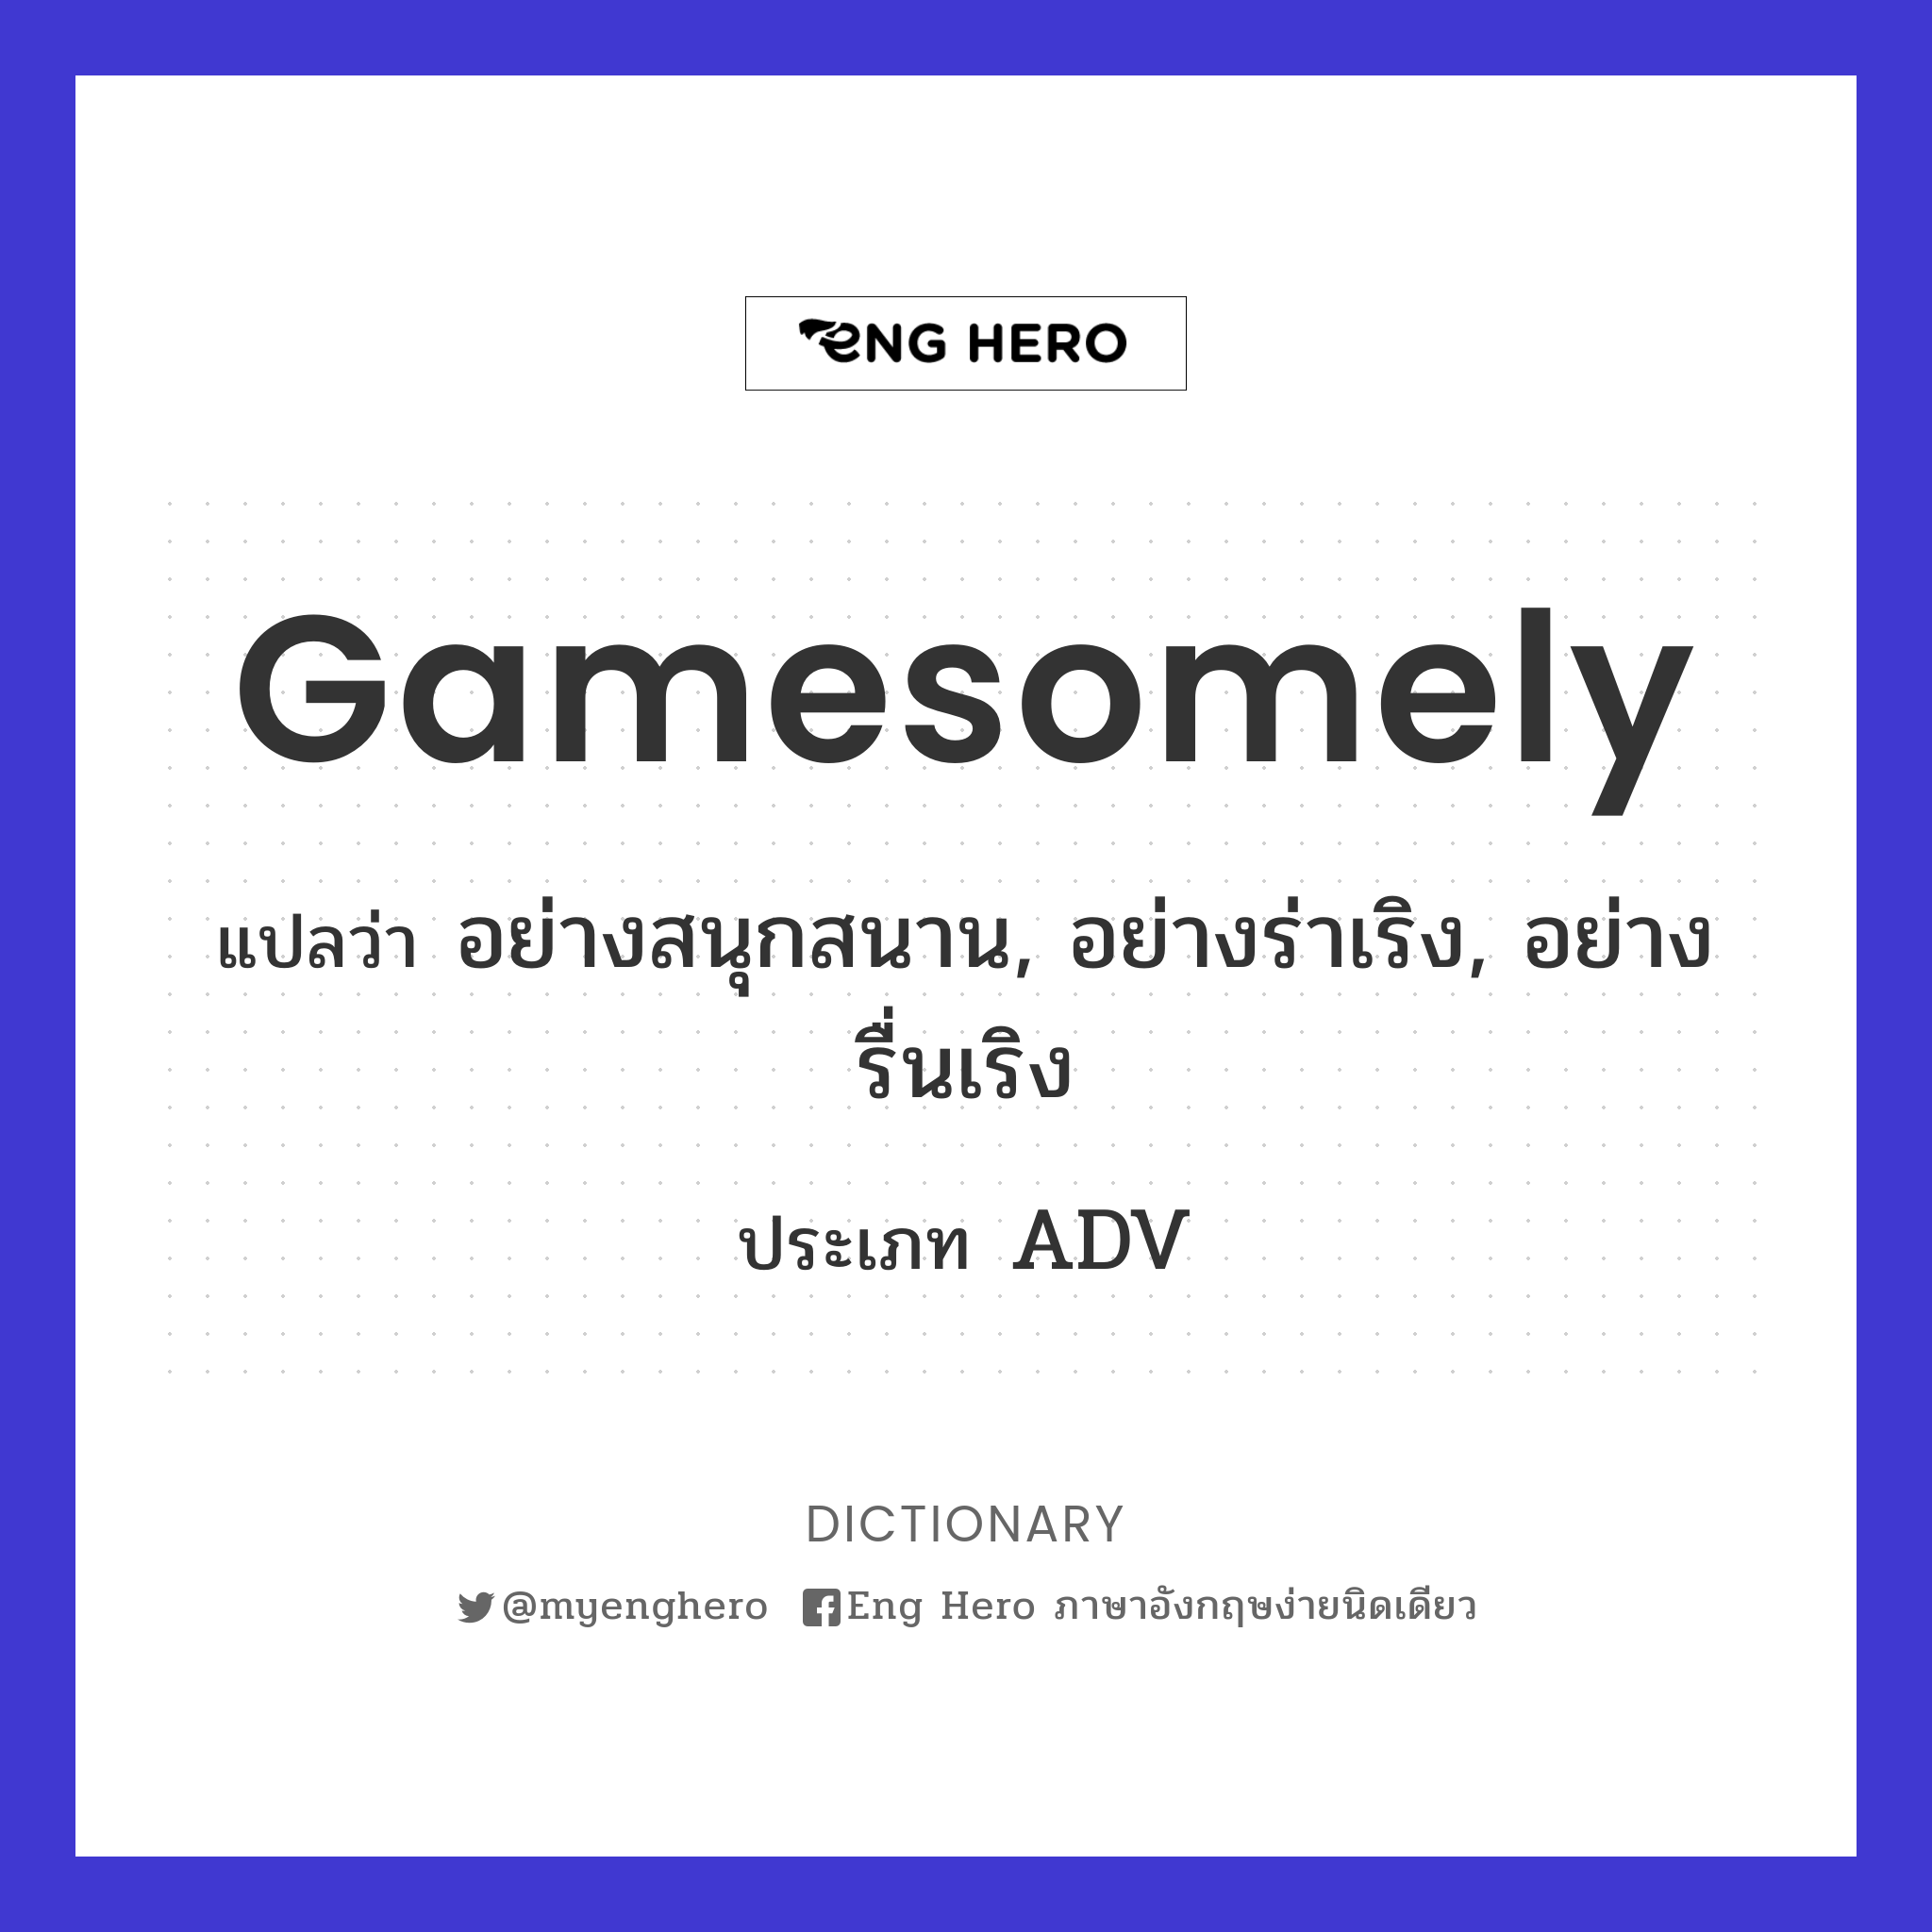 gamesomely